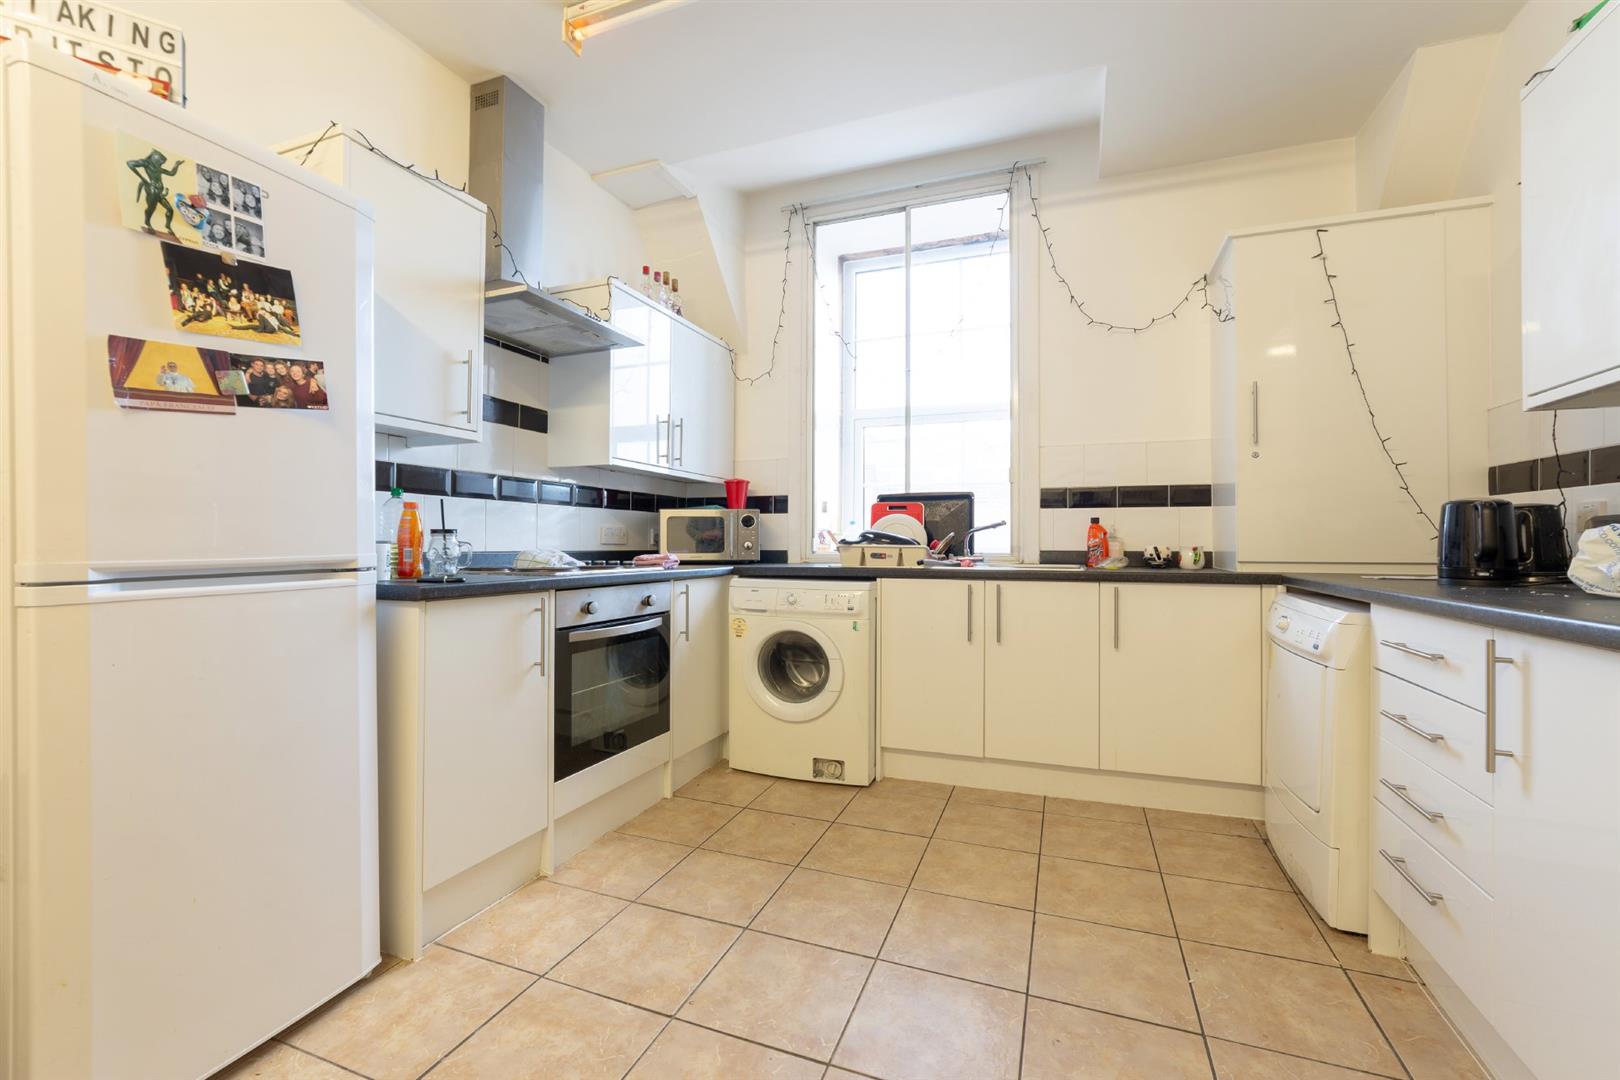 4 bed apartment to rent in Clayton Street West, City Centre  - Property Image 3